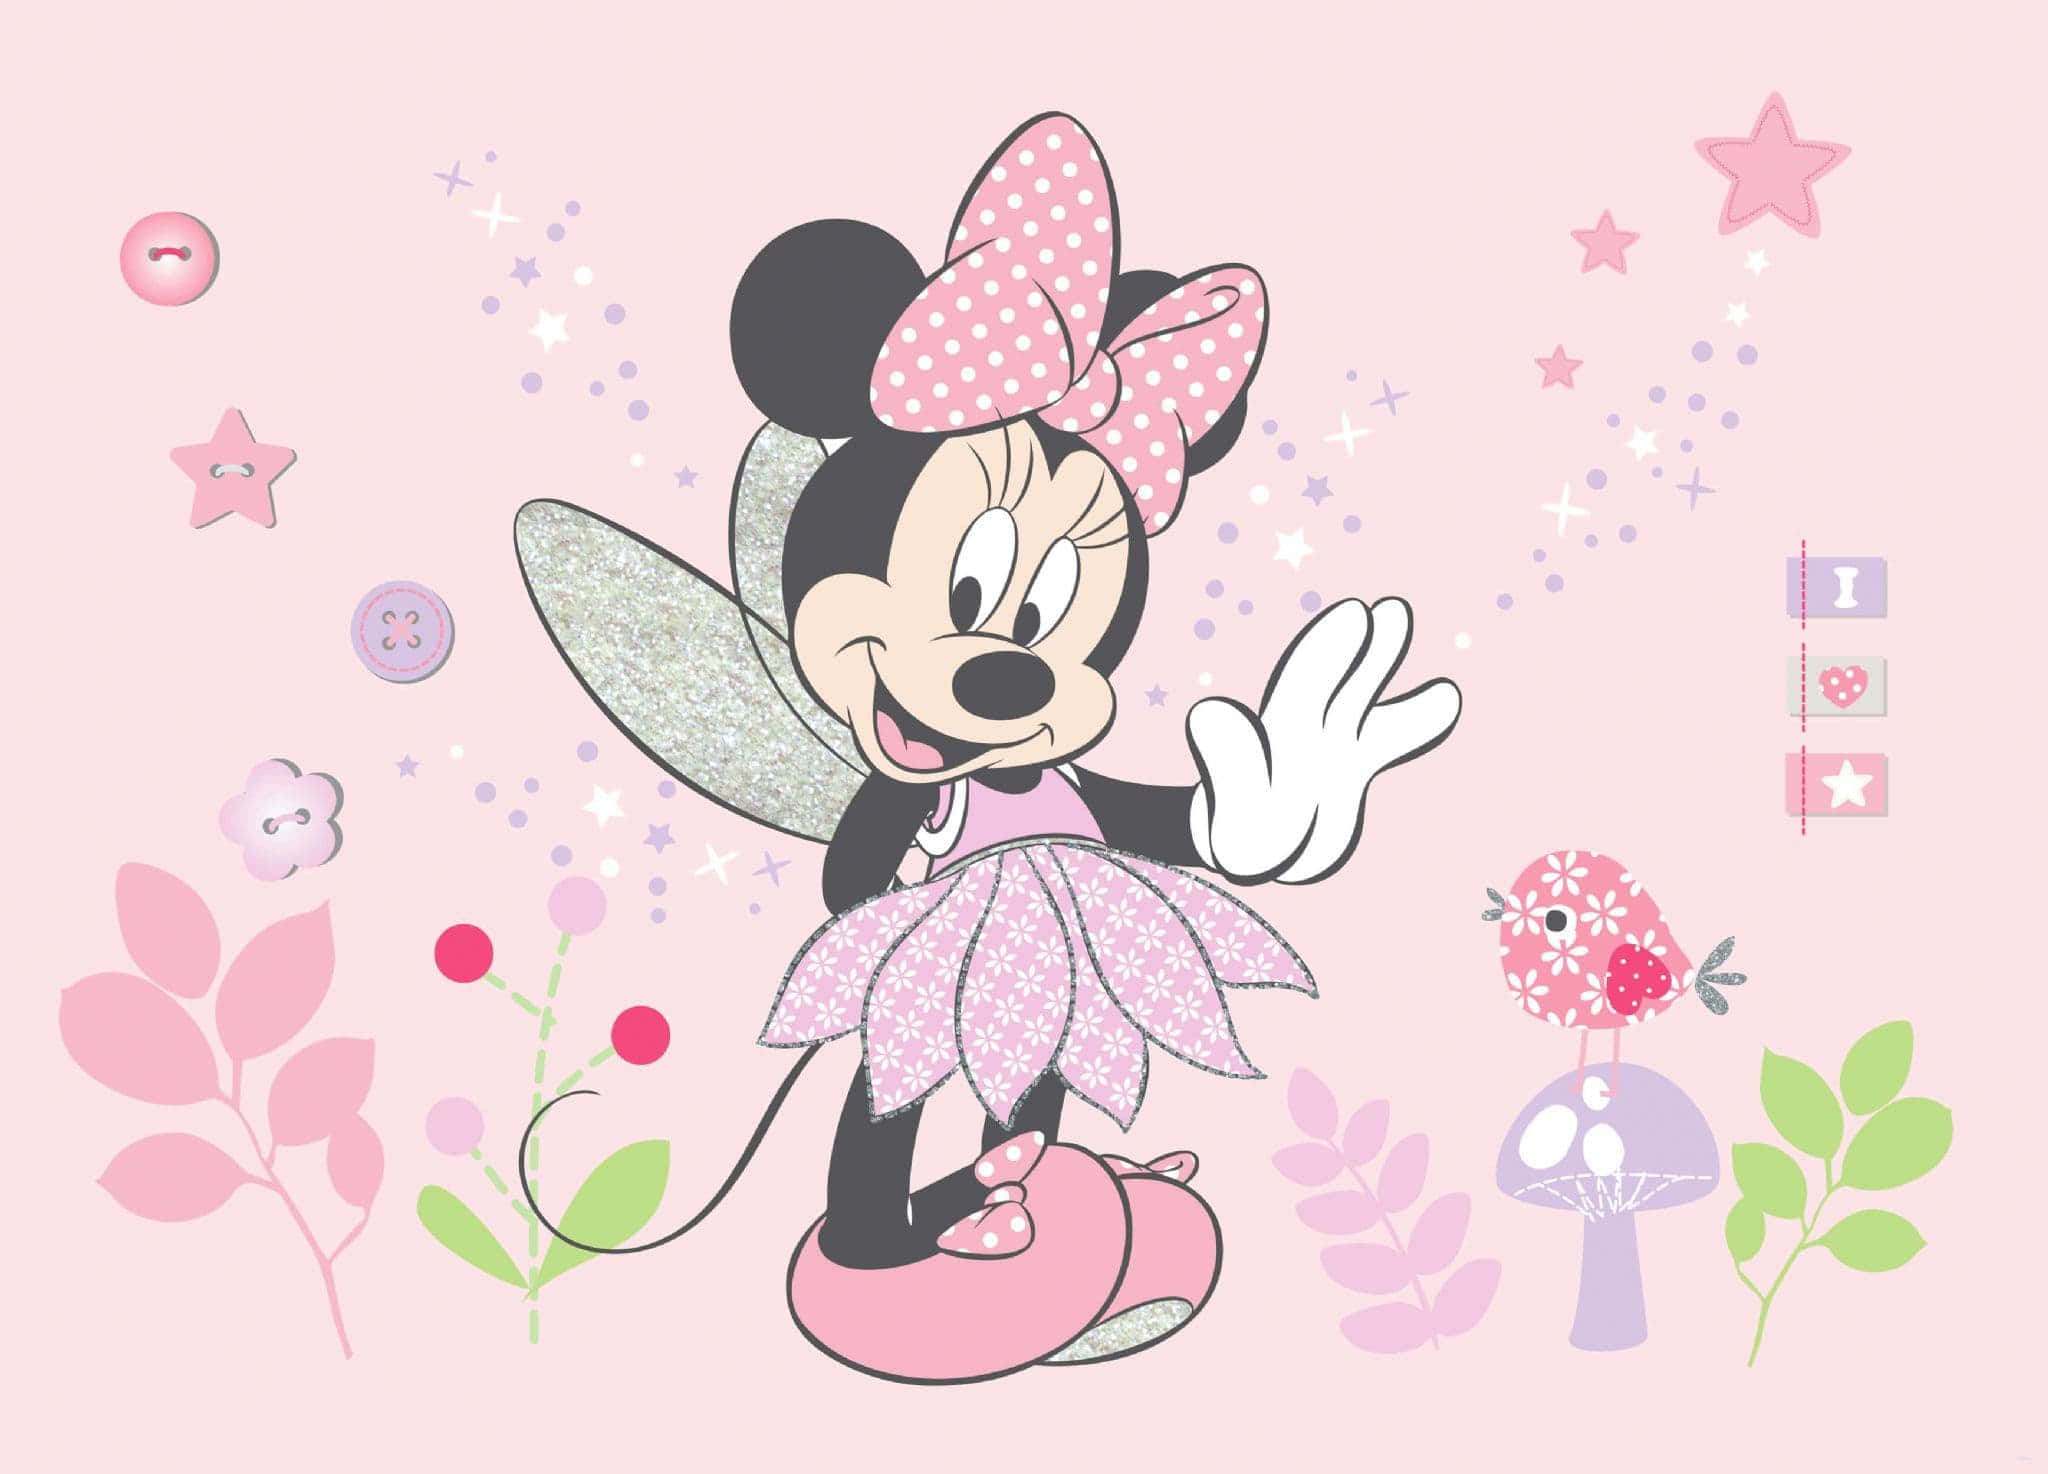 Celebrate The Magic of Disney with Minnie Mouse!